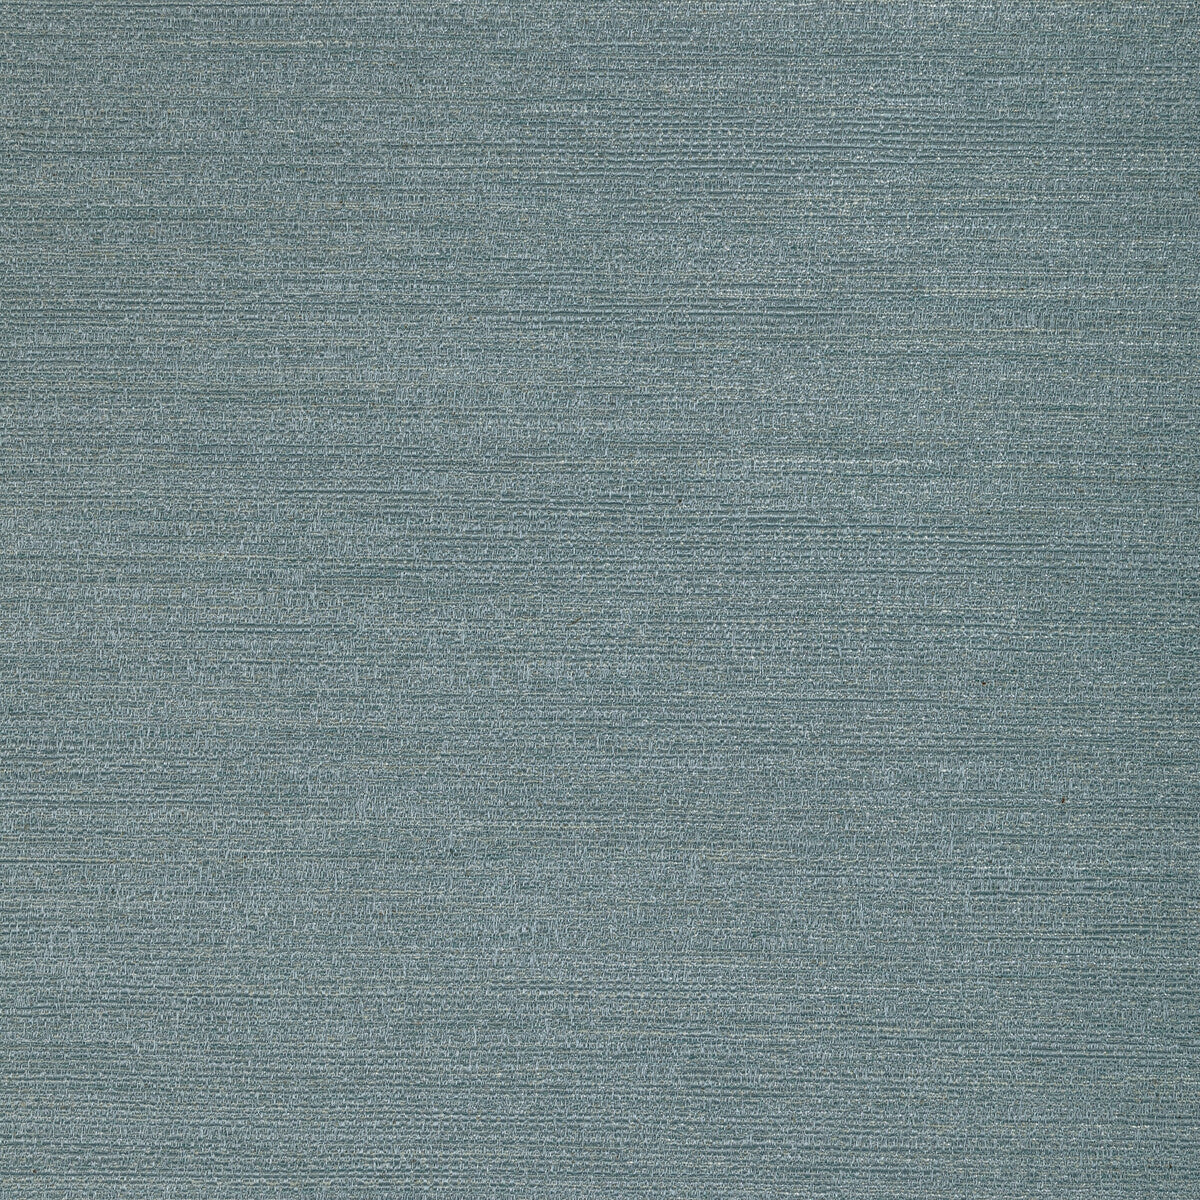 Cultivate fabric in chambray color - pattern 4957.15.0 - by Kravet Couture in the Modern Luxe Silk Luster collection